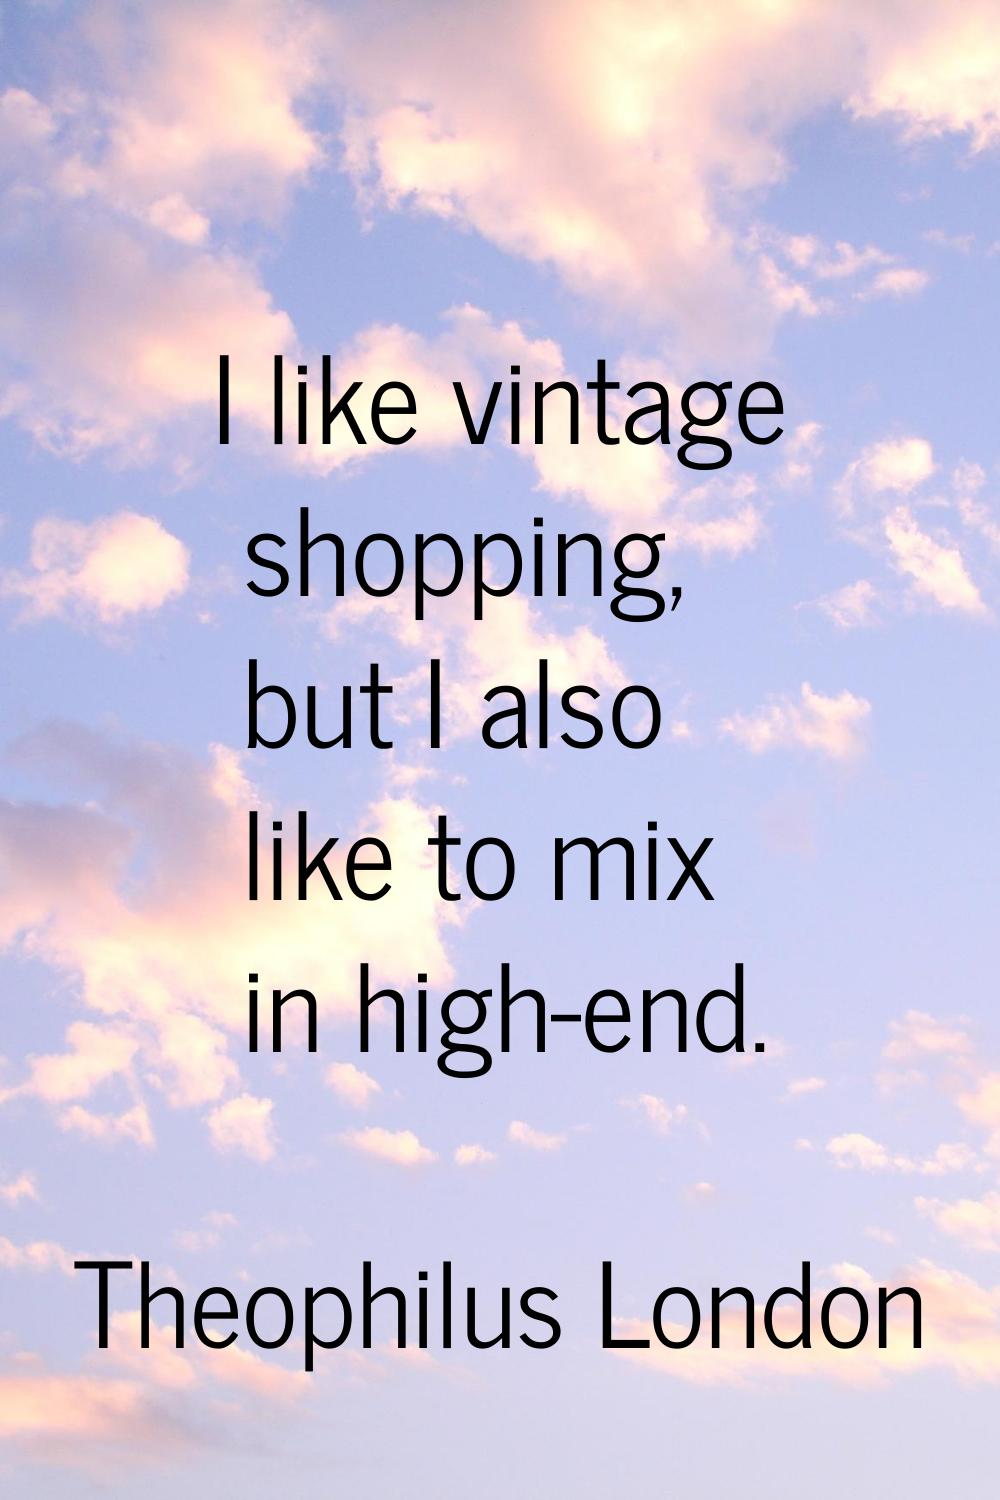 I like vintage shopping, but I also like to mix in high-end.